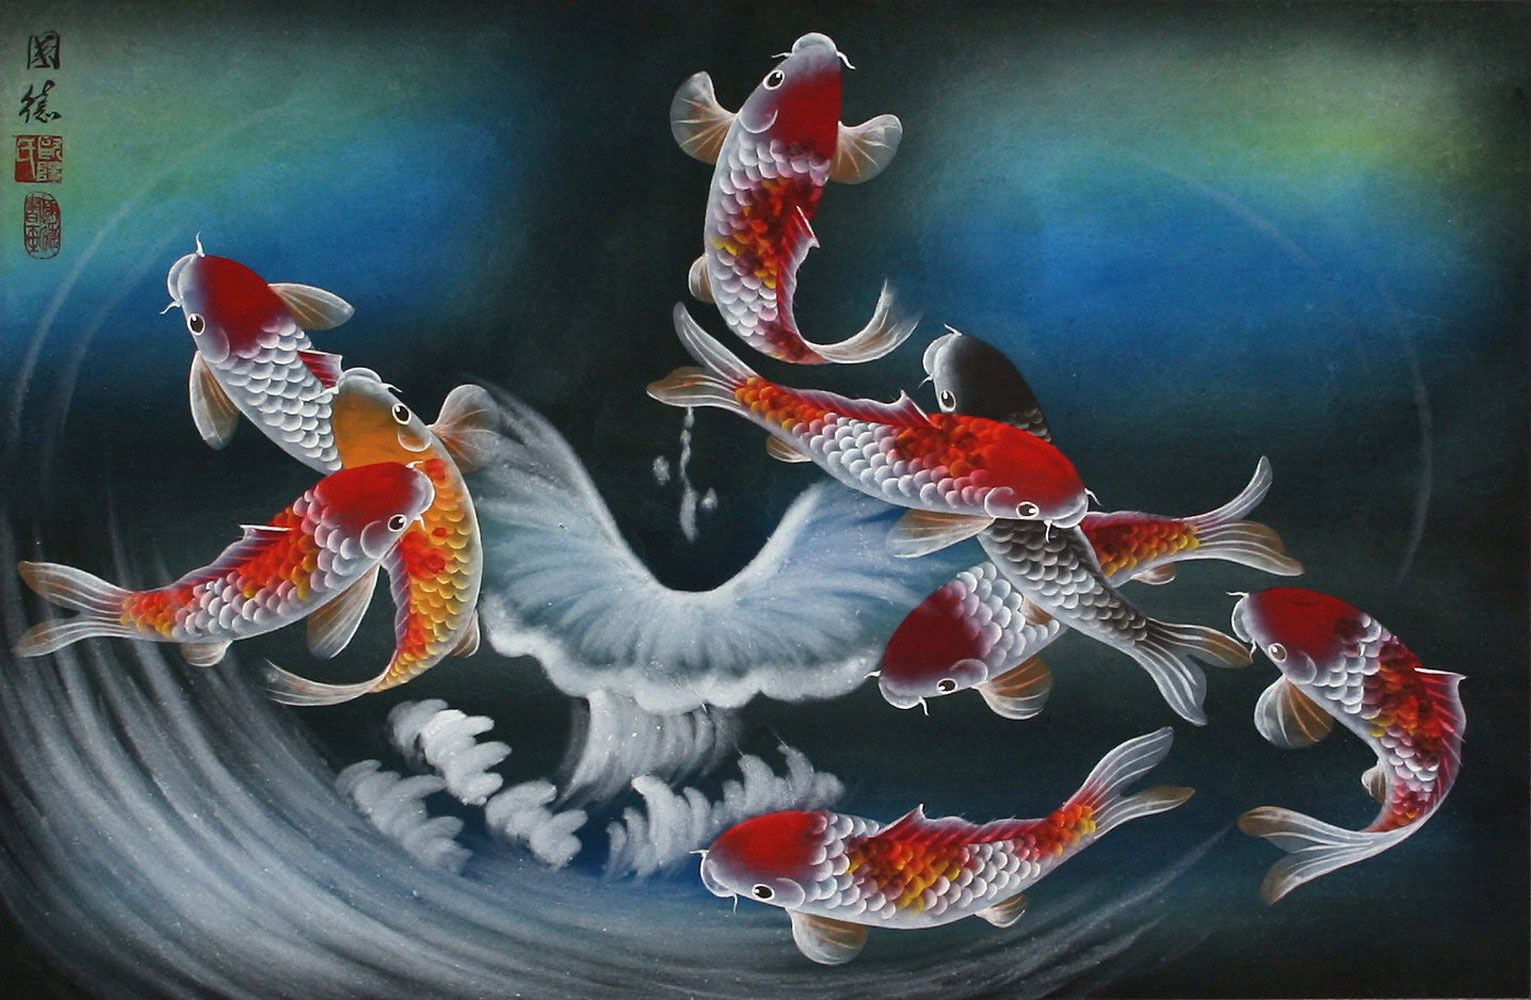 A painting of koi fish swimming in the water - Koi fish